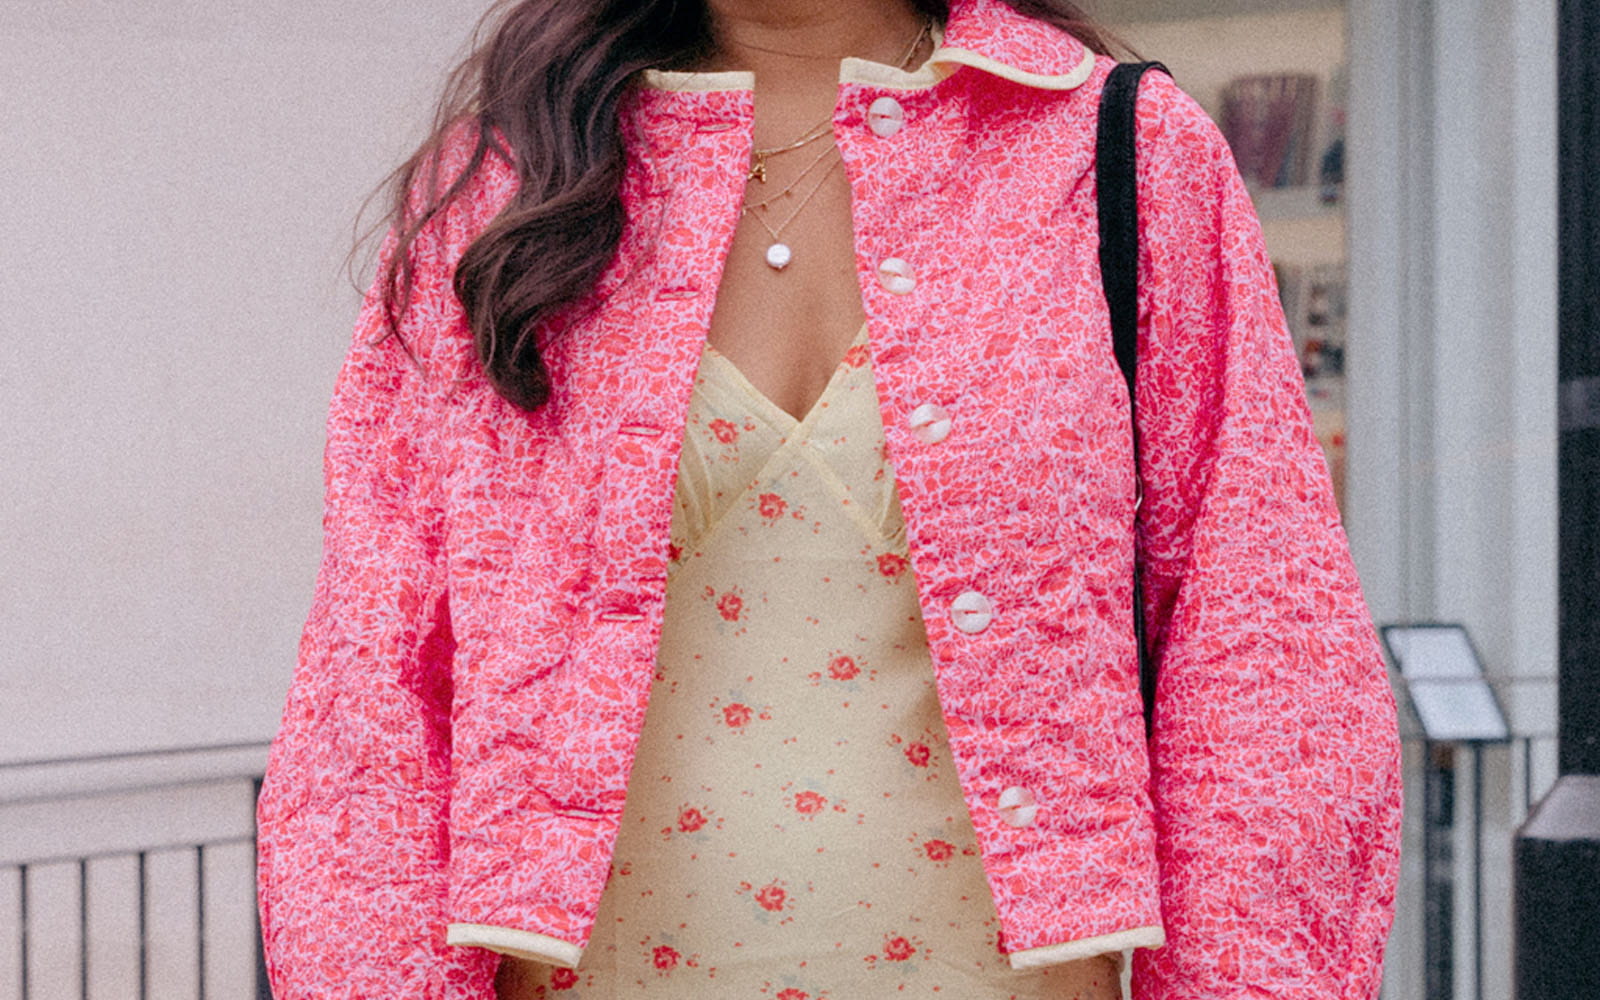 Close up of woman wearing a pink jacket